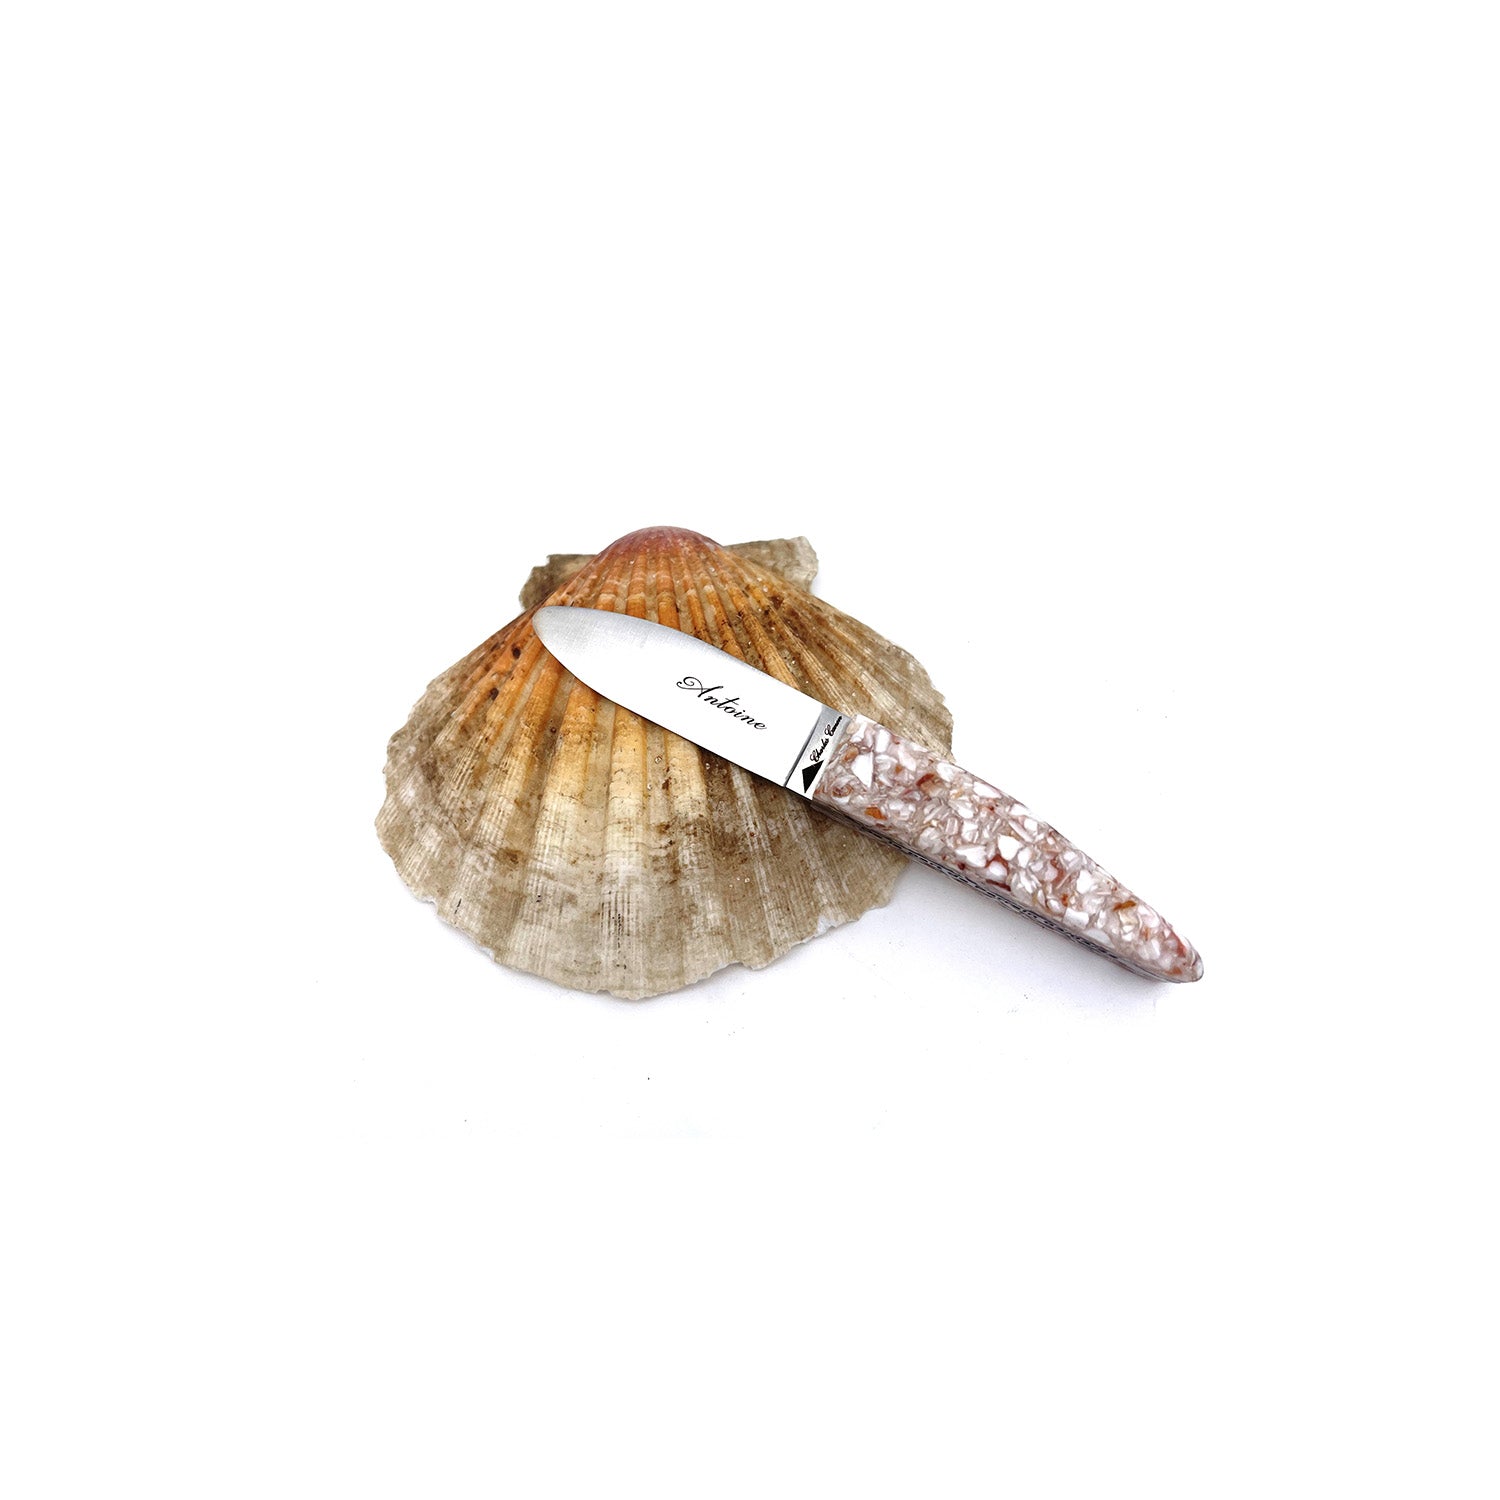 Children's knife with a handle made from recycled scallop shells